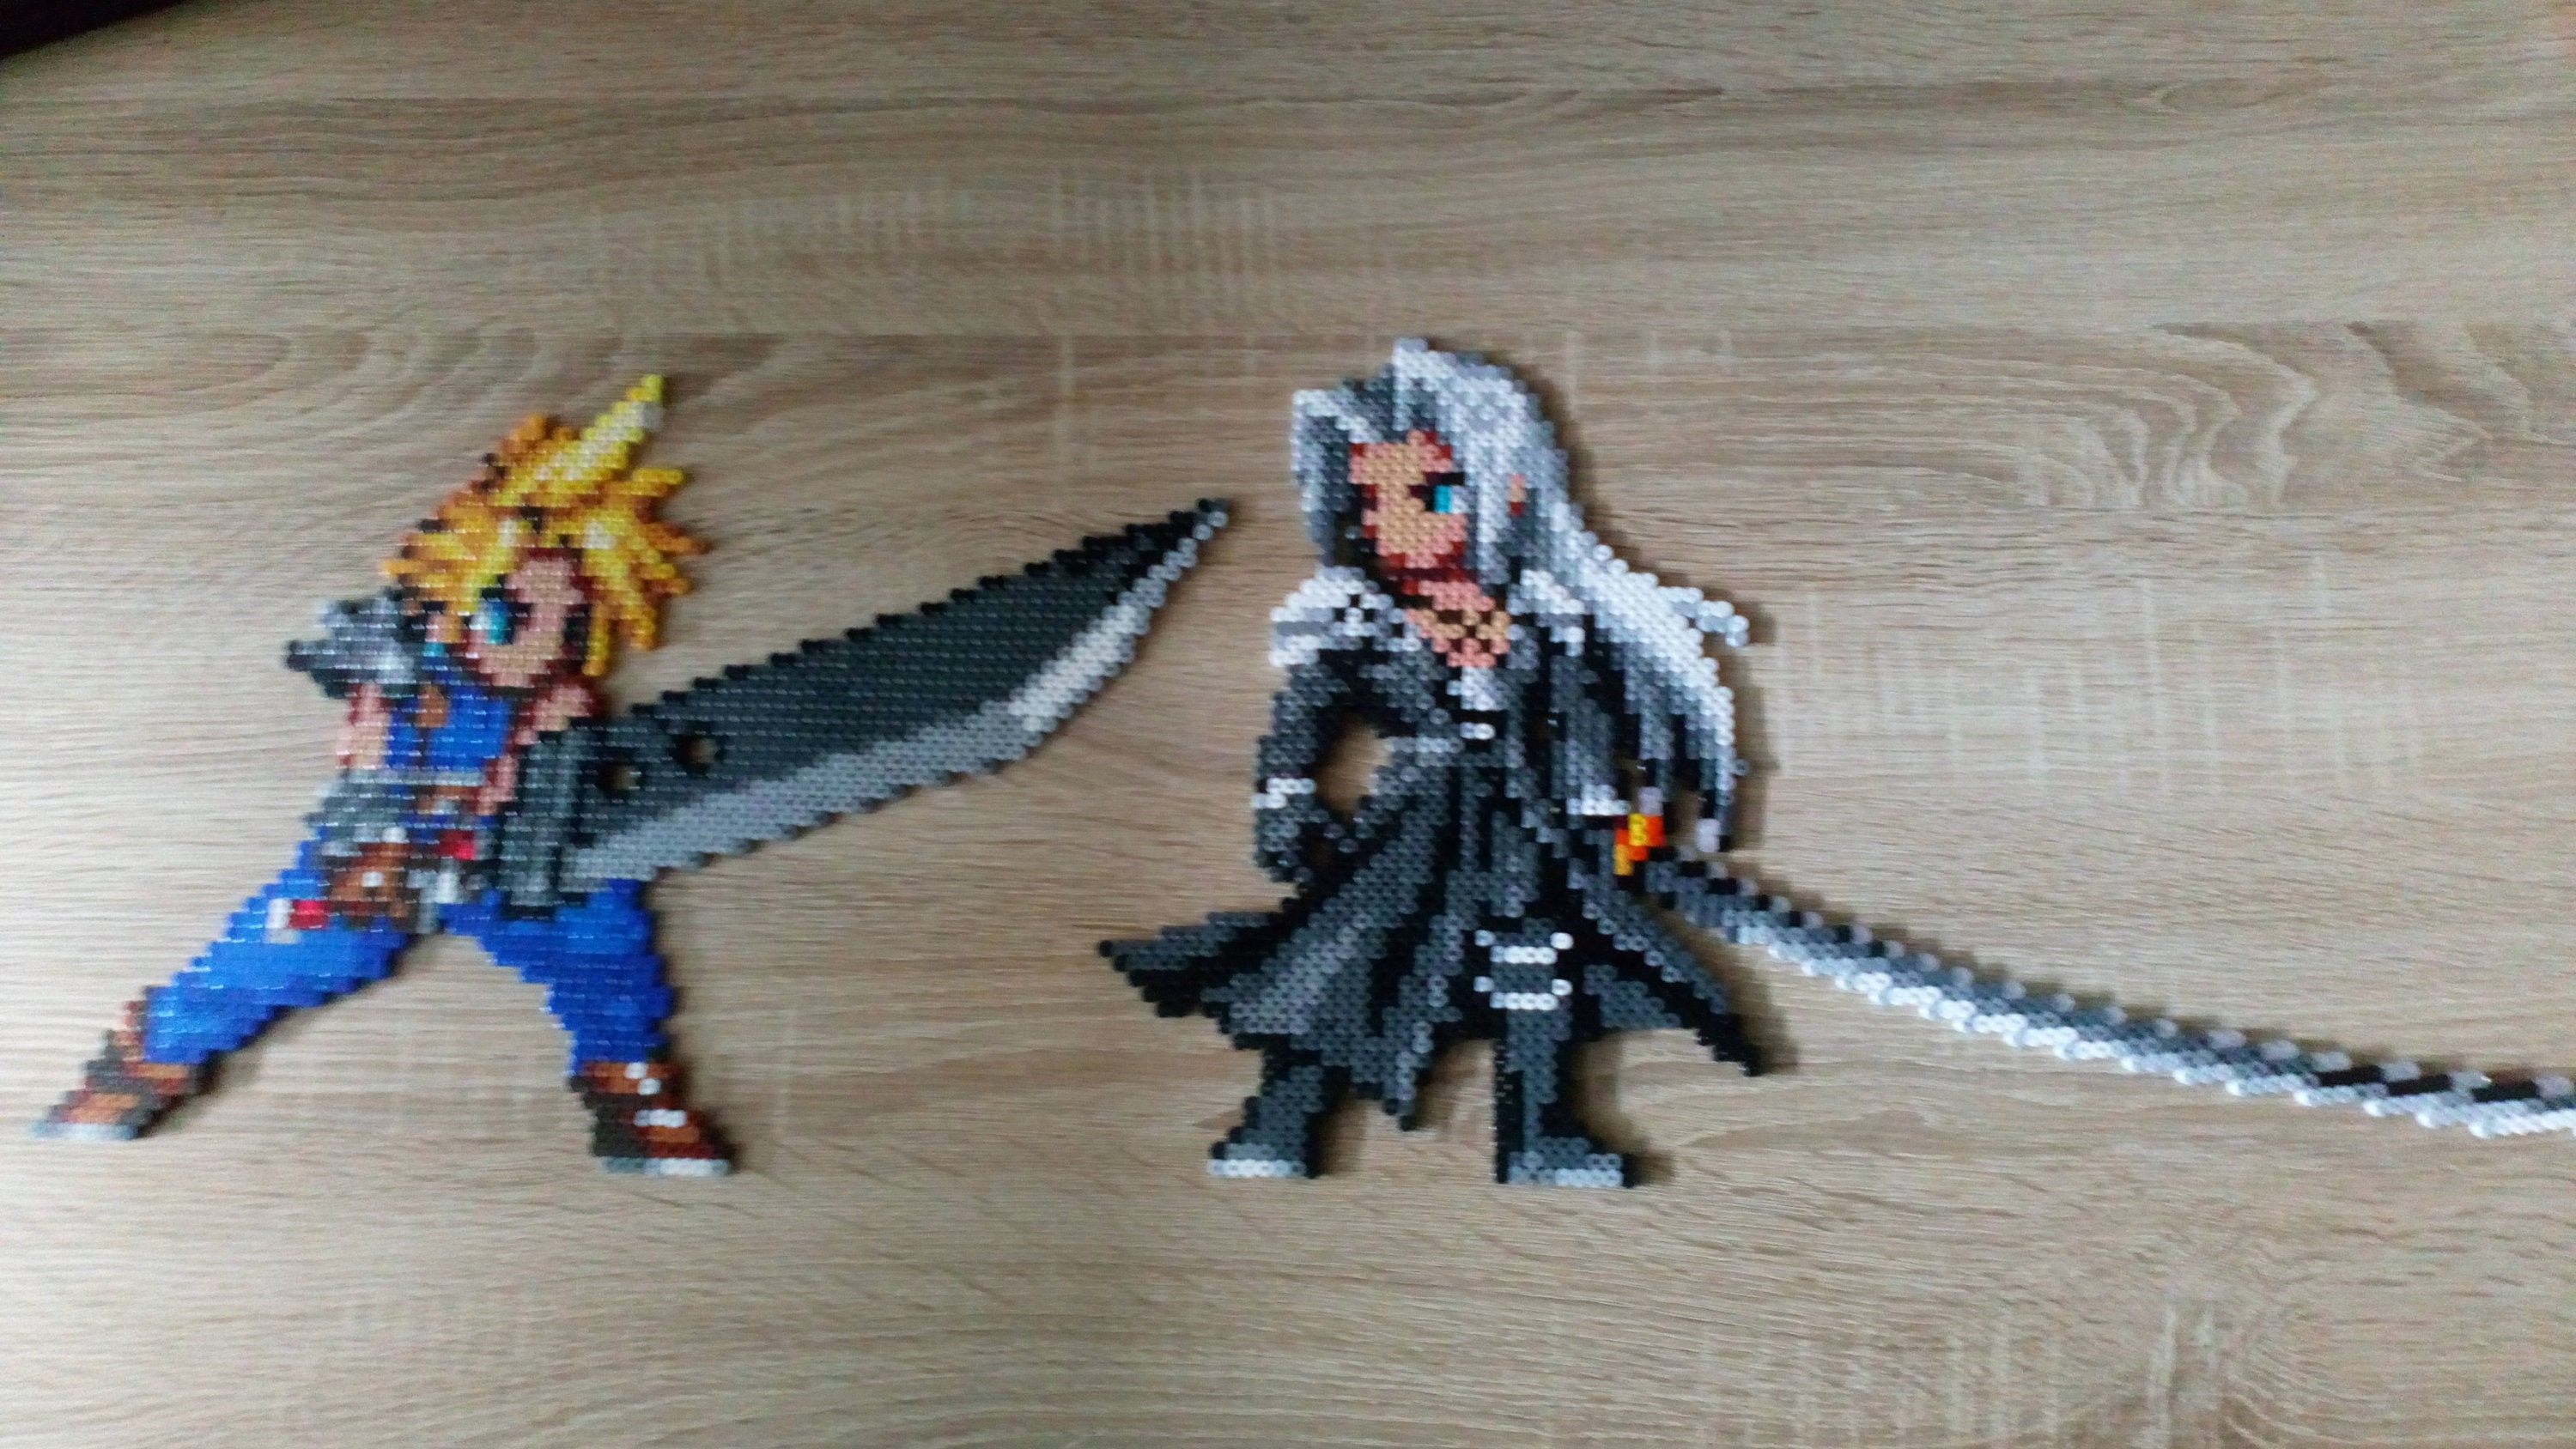 Final Fantasy, Perler, Bead Pixel Art, Red Mage, Black Mage, White Mage,  Fighter, Thief, Monk 